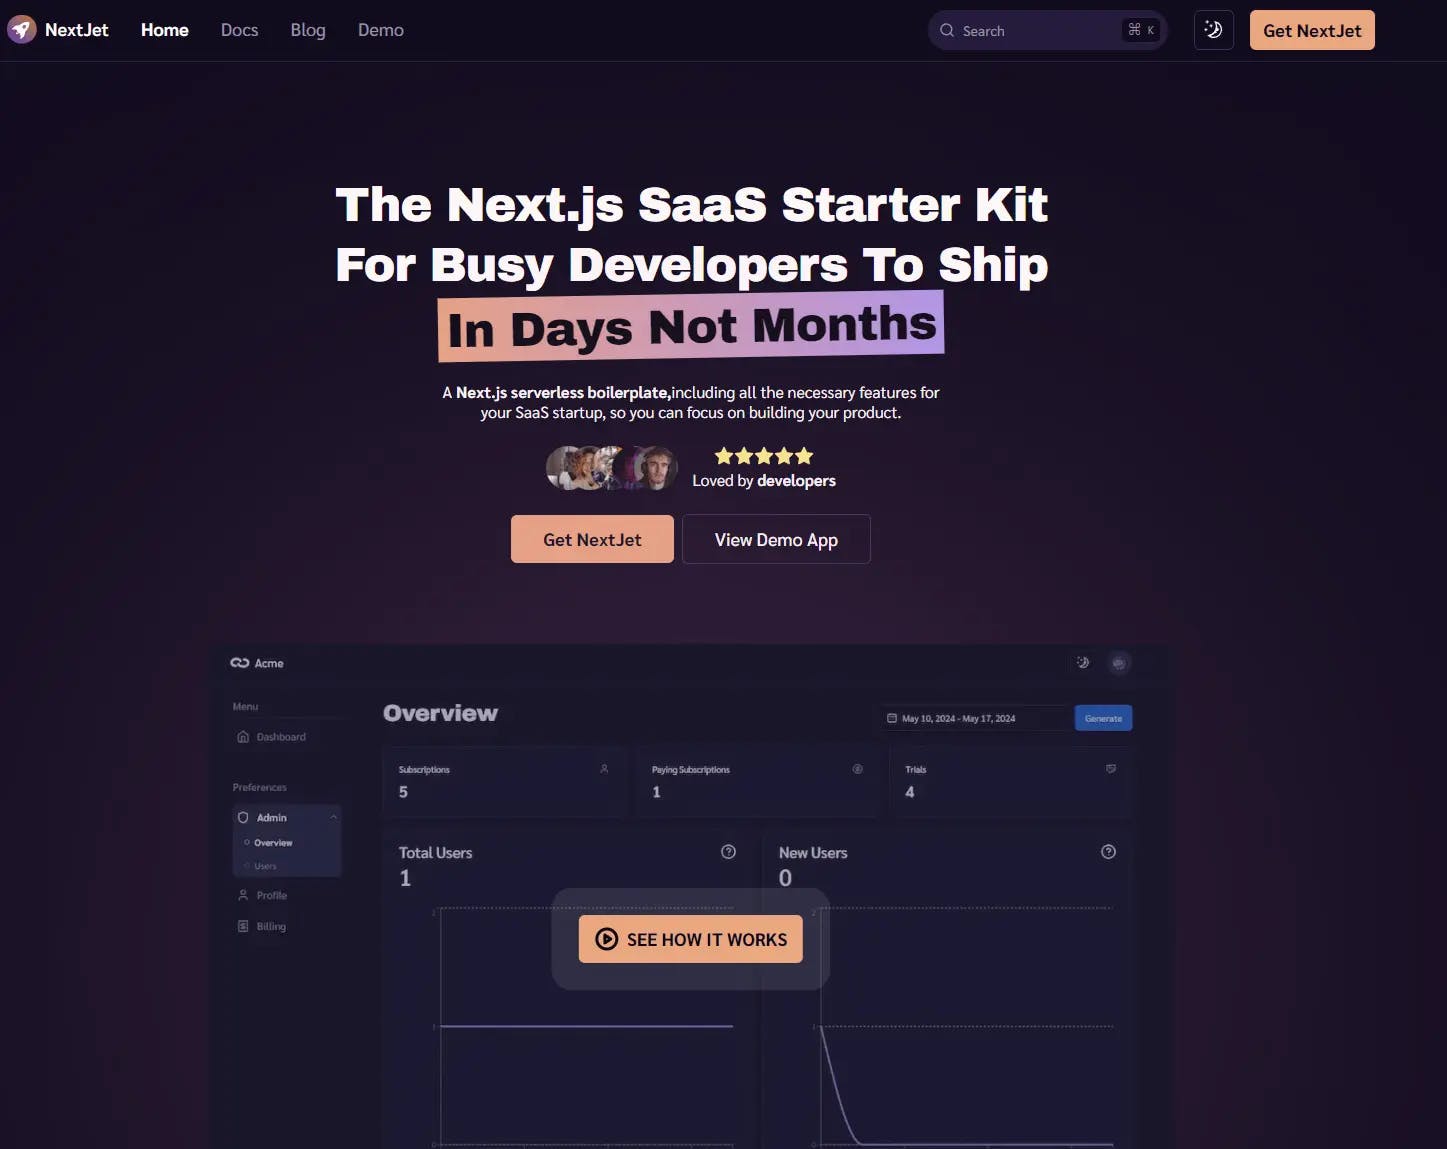 NextJet, The Next.js SaaS Starter Kit For Busy Developers To Ship In Days Not Months